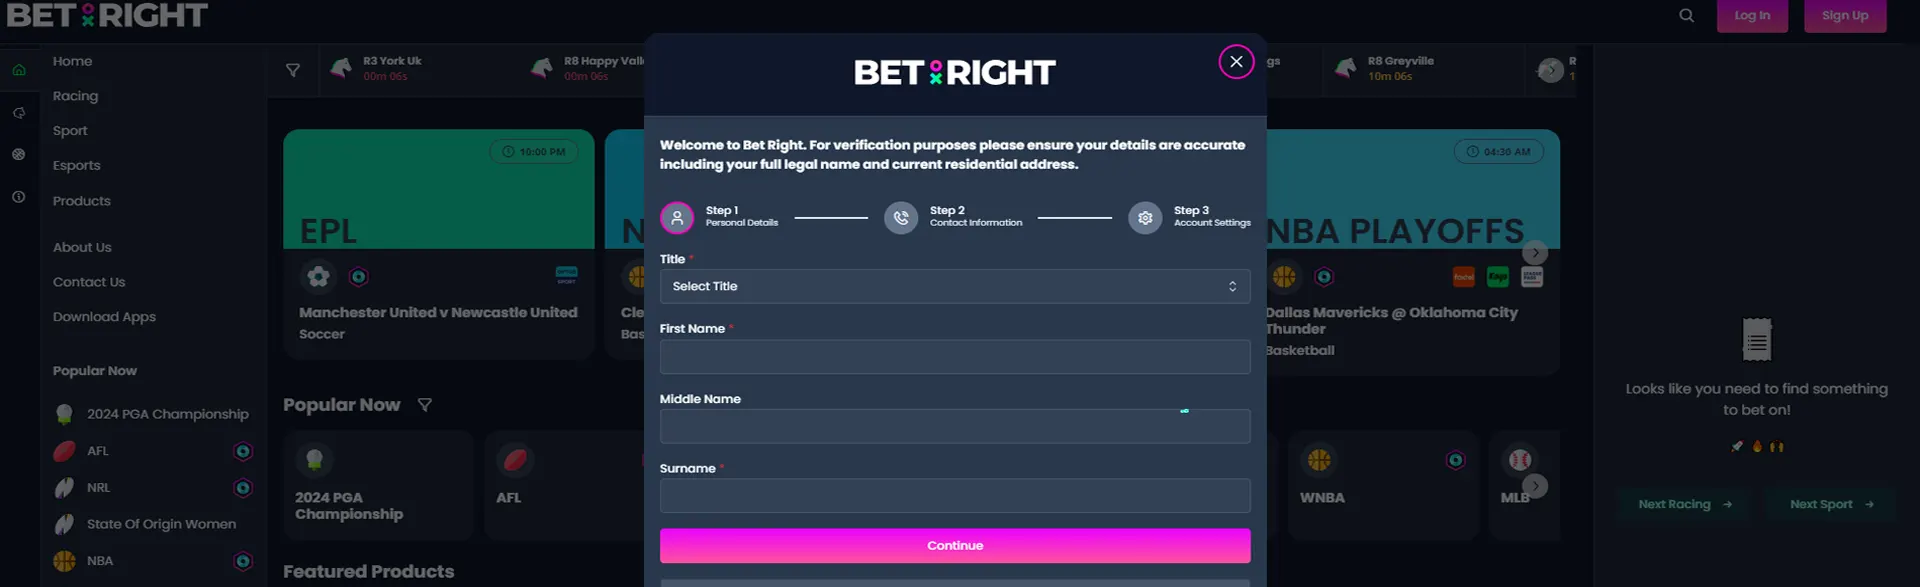 Page with Bet right login form for entering personal details.